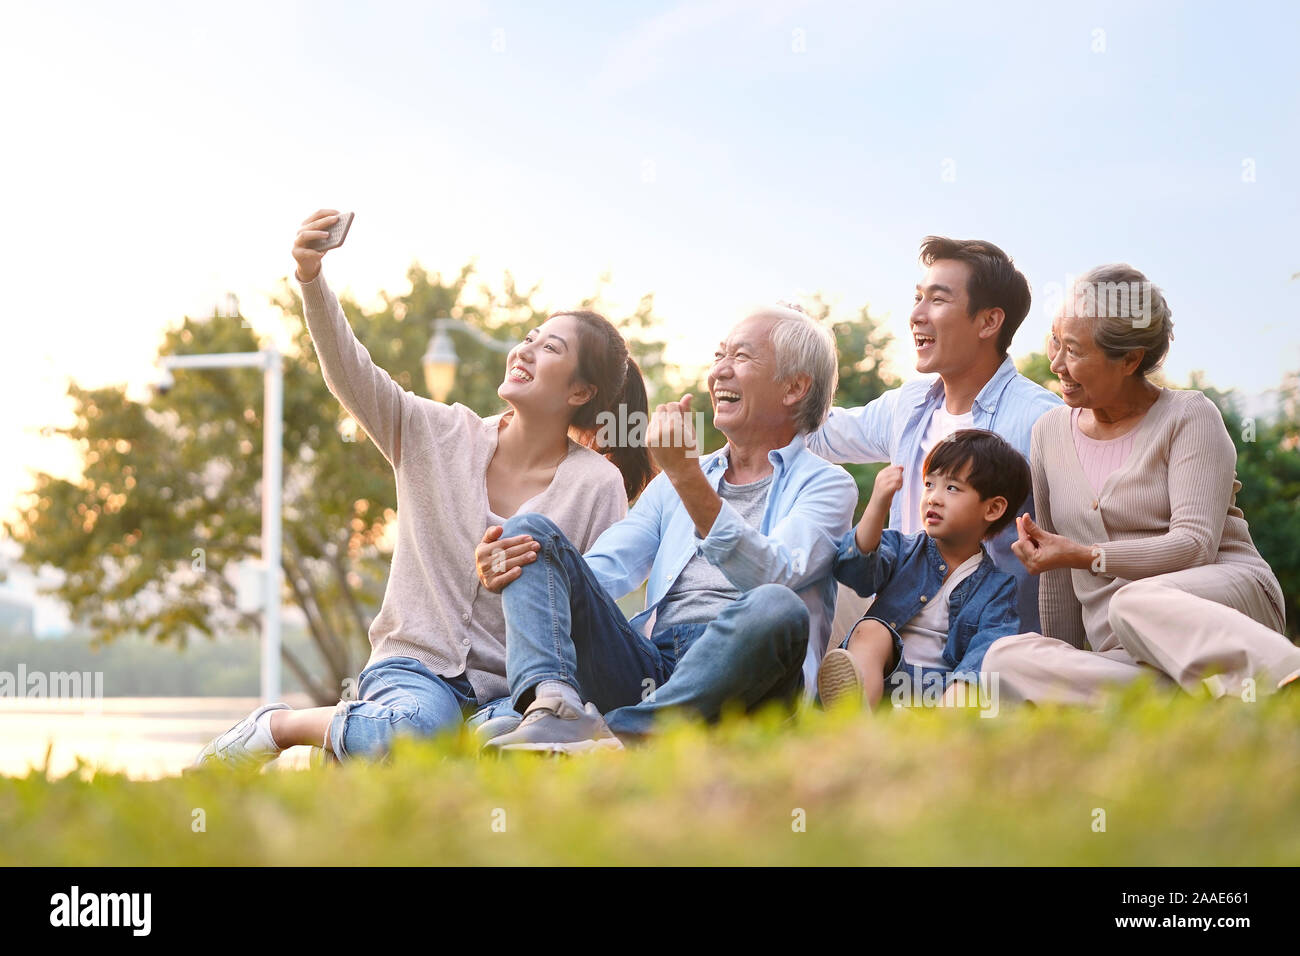 three generation happy asian family sitting on grass taking a selfie using mobile phone outdoors in park Stock Photo